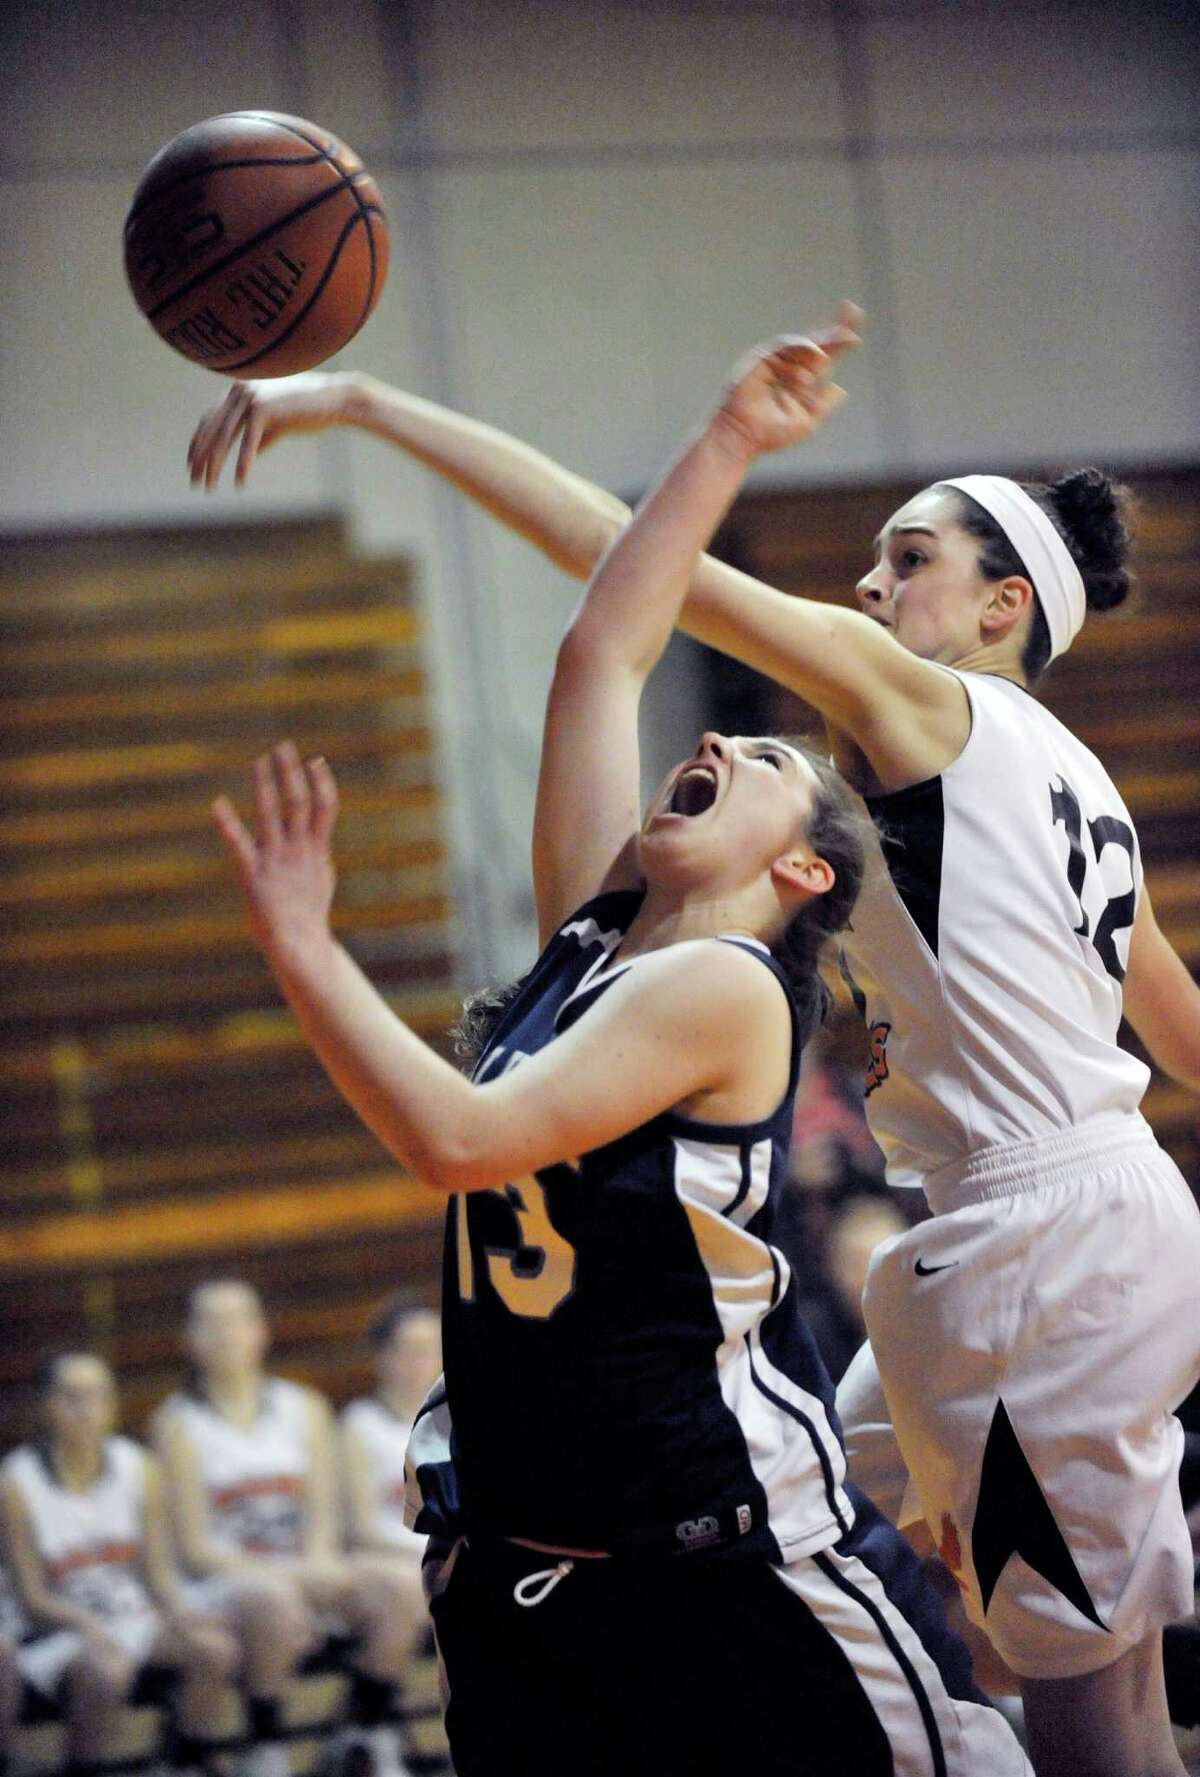 Columbia's Sarah Jaromin ,left, is defended by Bethlehem's Jenna Giacone during their girls' basketballl game in Delmar, N.Y., Friday, Jan. 10, 2014. (Hans Pennink / Special to the Times Union) ORG XMIT: HP101